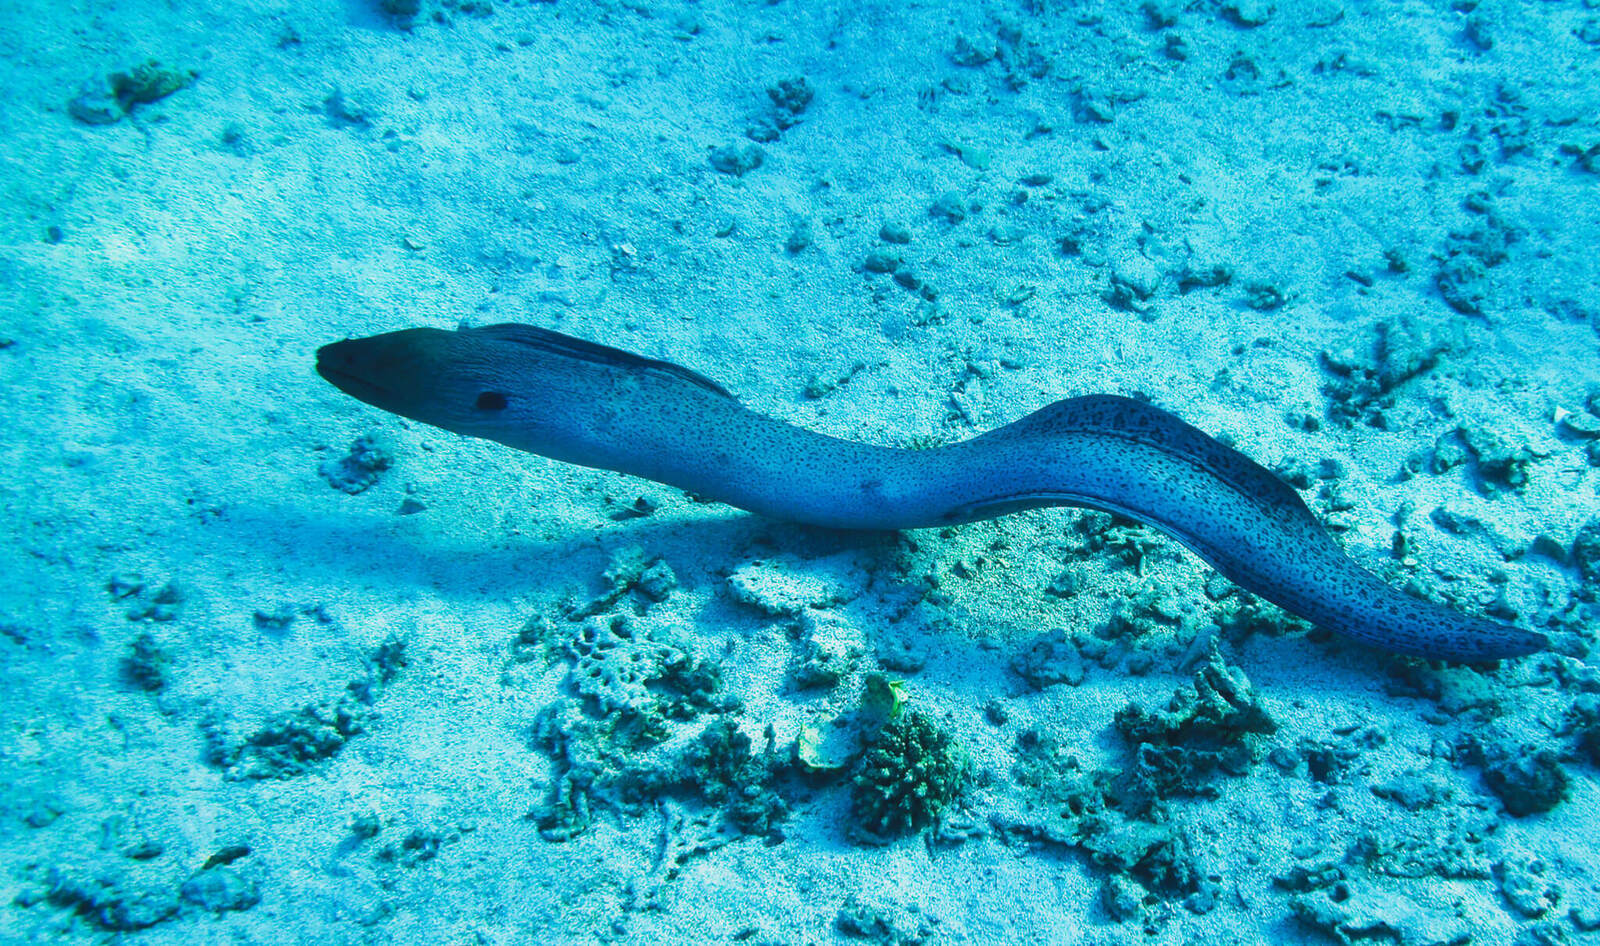 Overfishing is Driving Eels to Extinction. Can Forsea Foods’ Cell Technology Save Them?